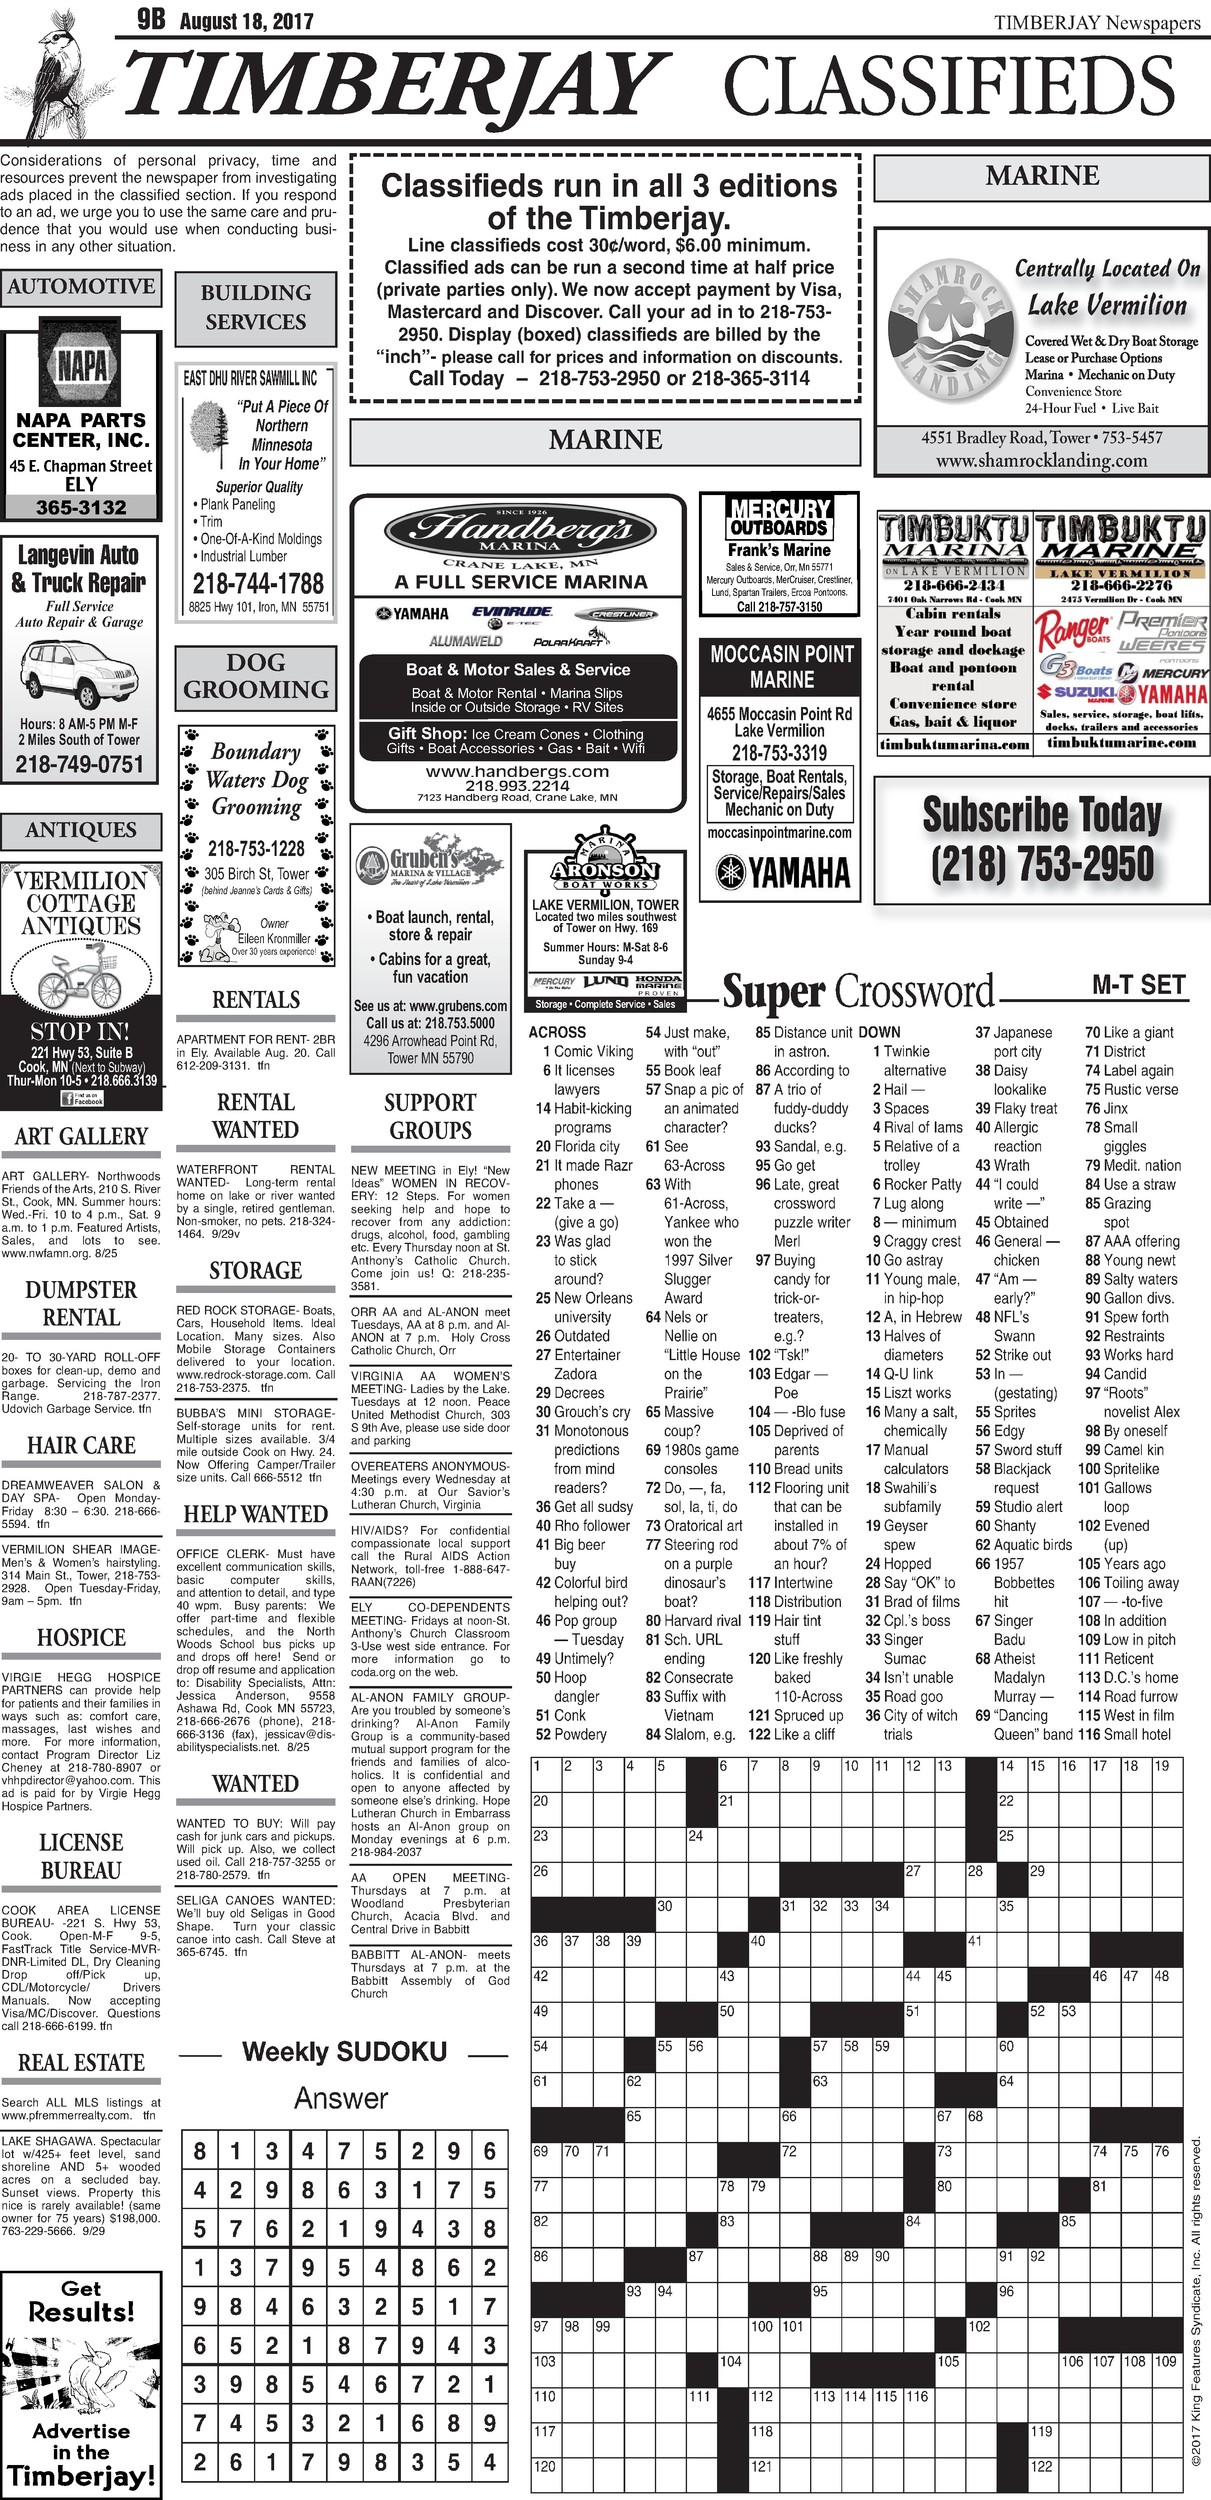 Click here to view the legal notices and classifieds from page 9B